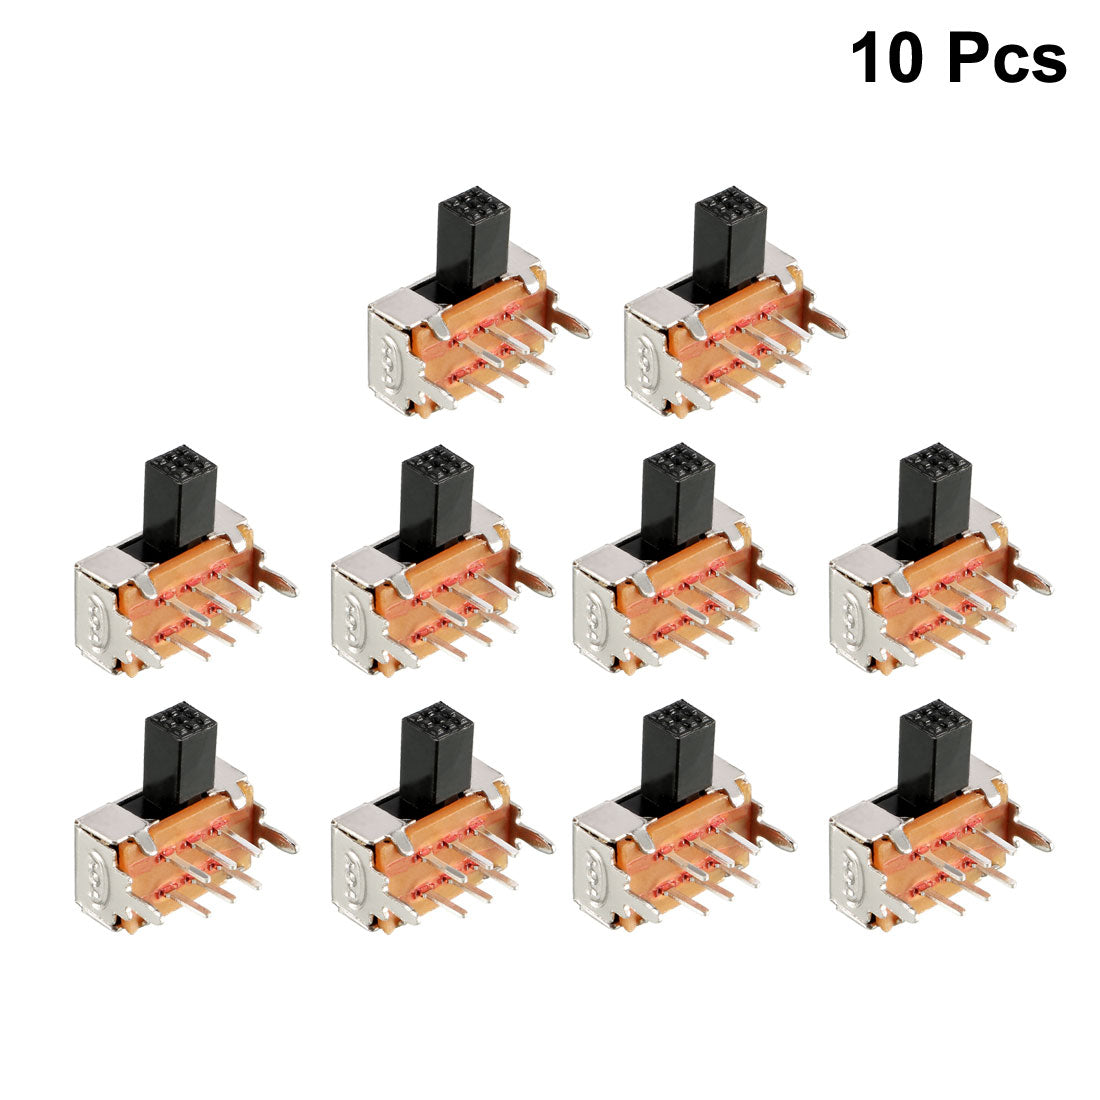 uxcell Uxcell 10Pcs 5mm Horizontal Slide Switch DPDT 2P2T 6 Terminals PCB Panel Latching